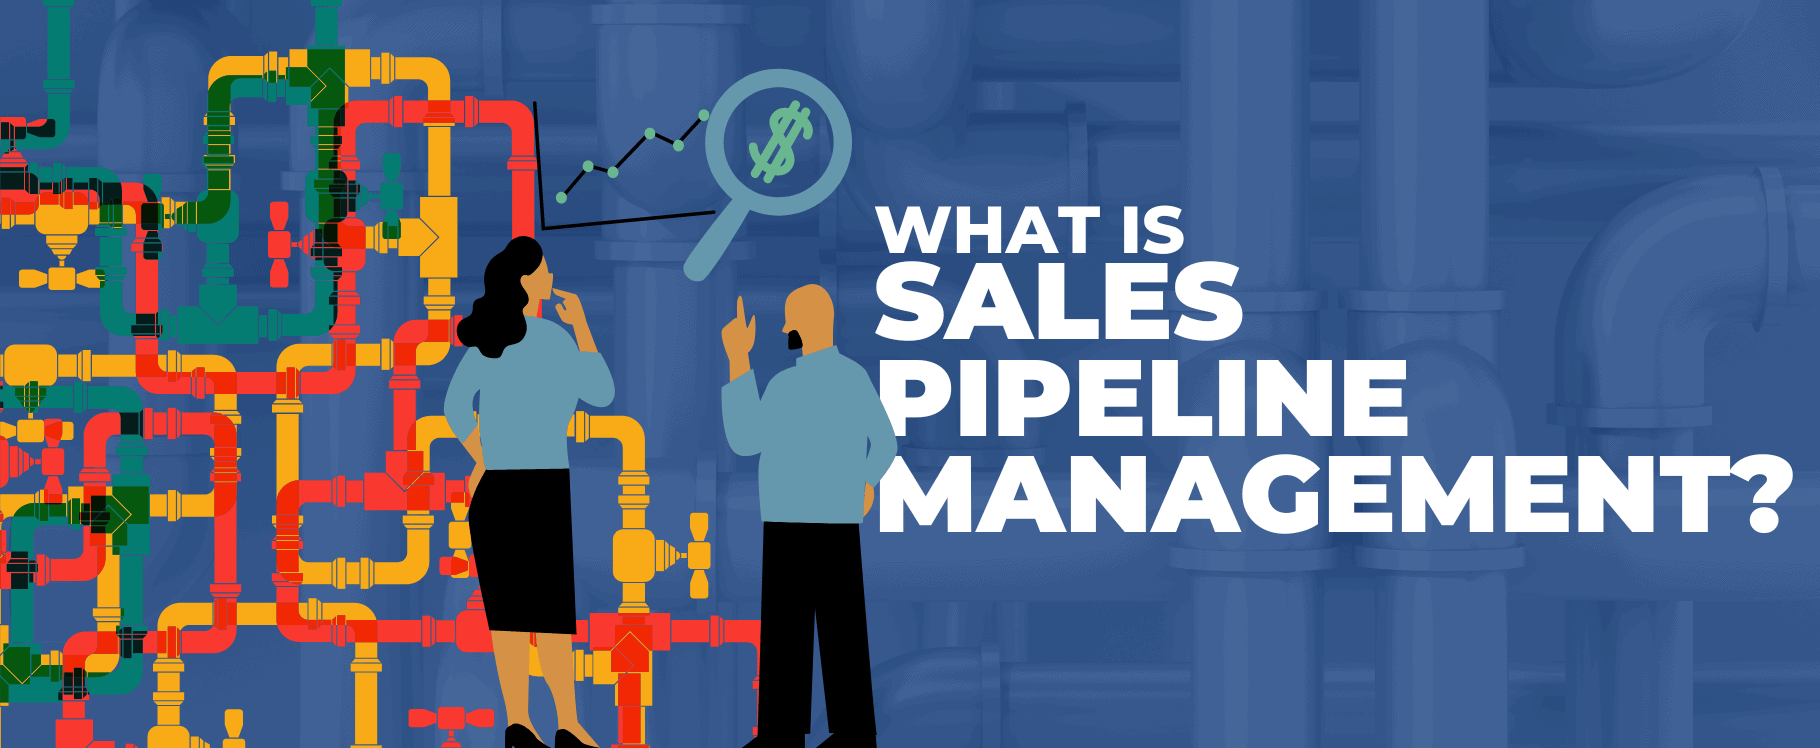 what is sales pipeline management?